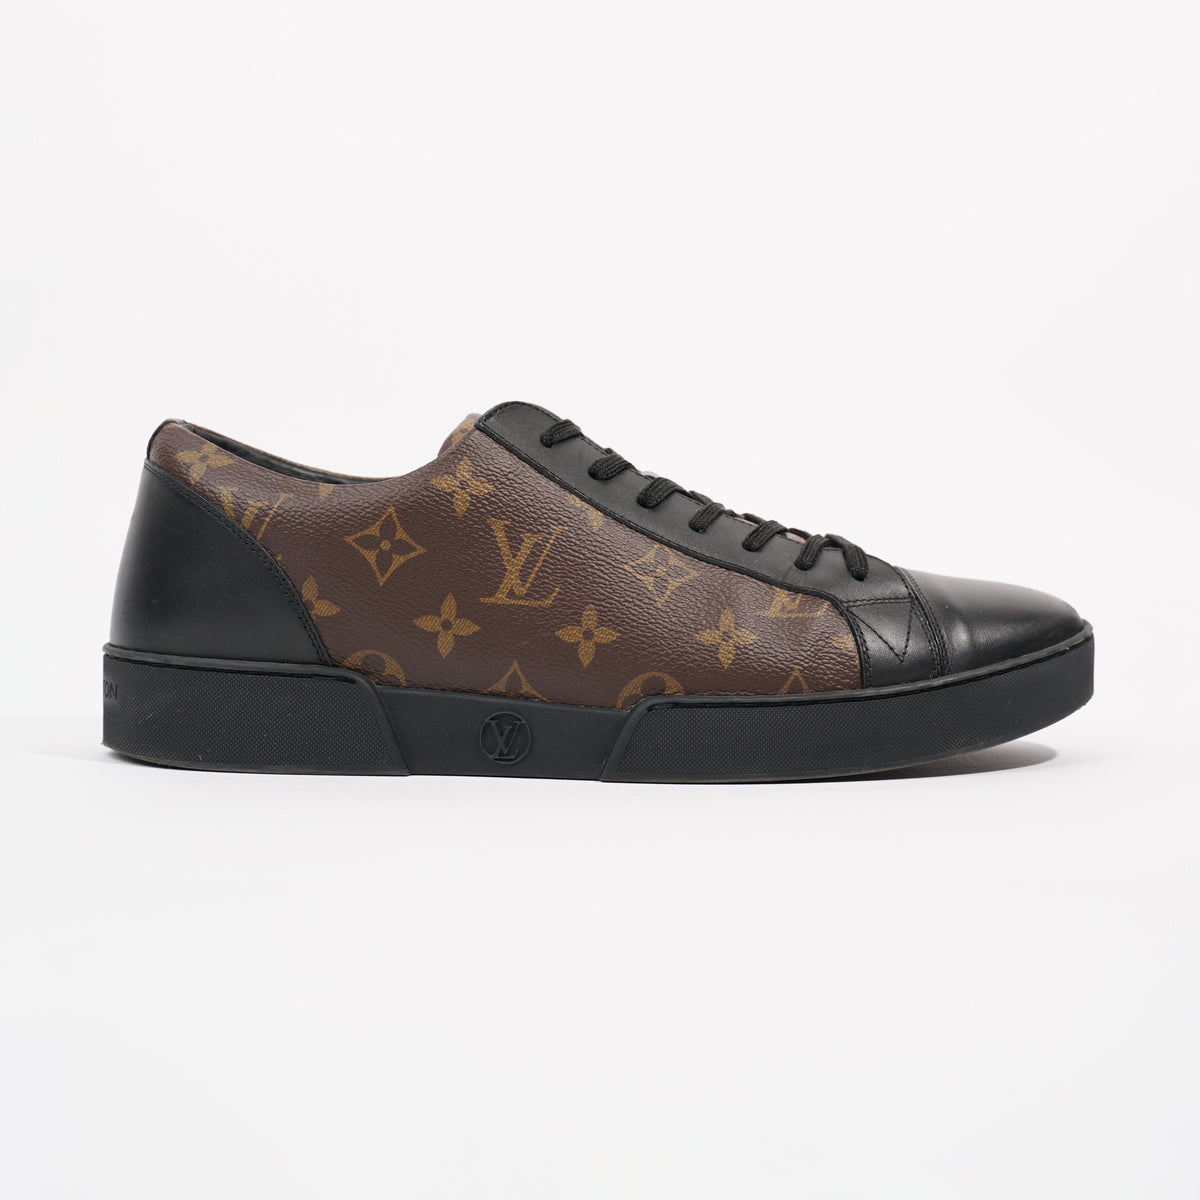 Louis Vuitton Black Suede and Canvas Low Top Sneakers Size 43